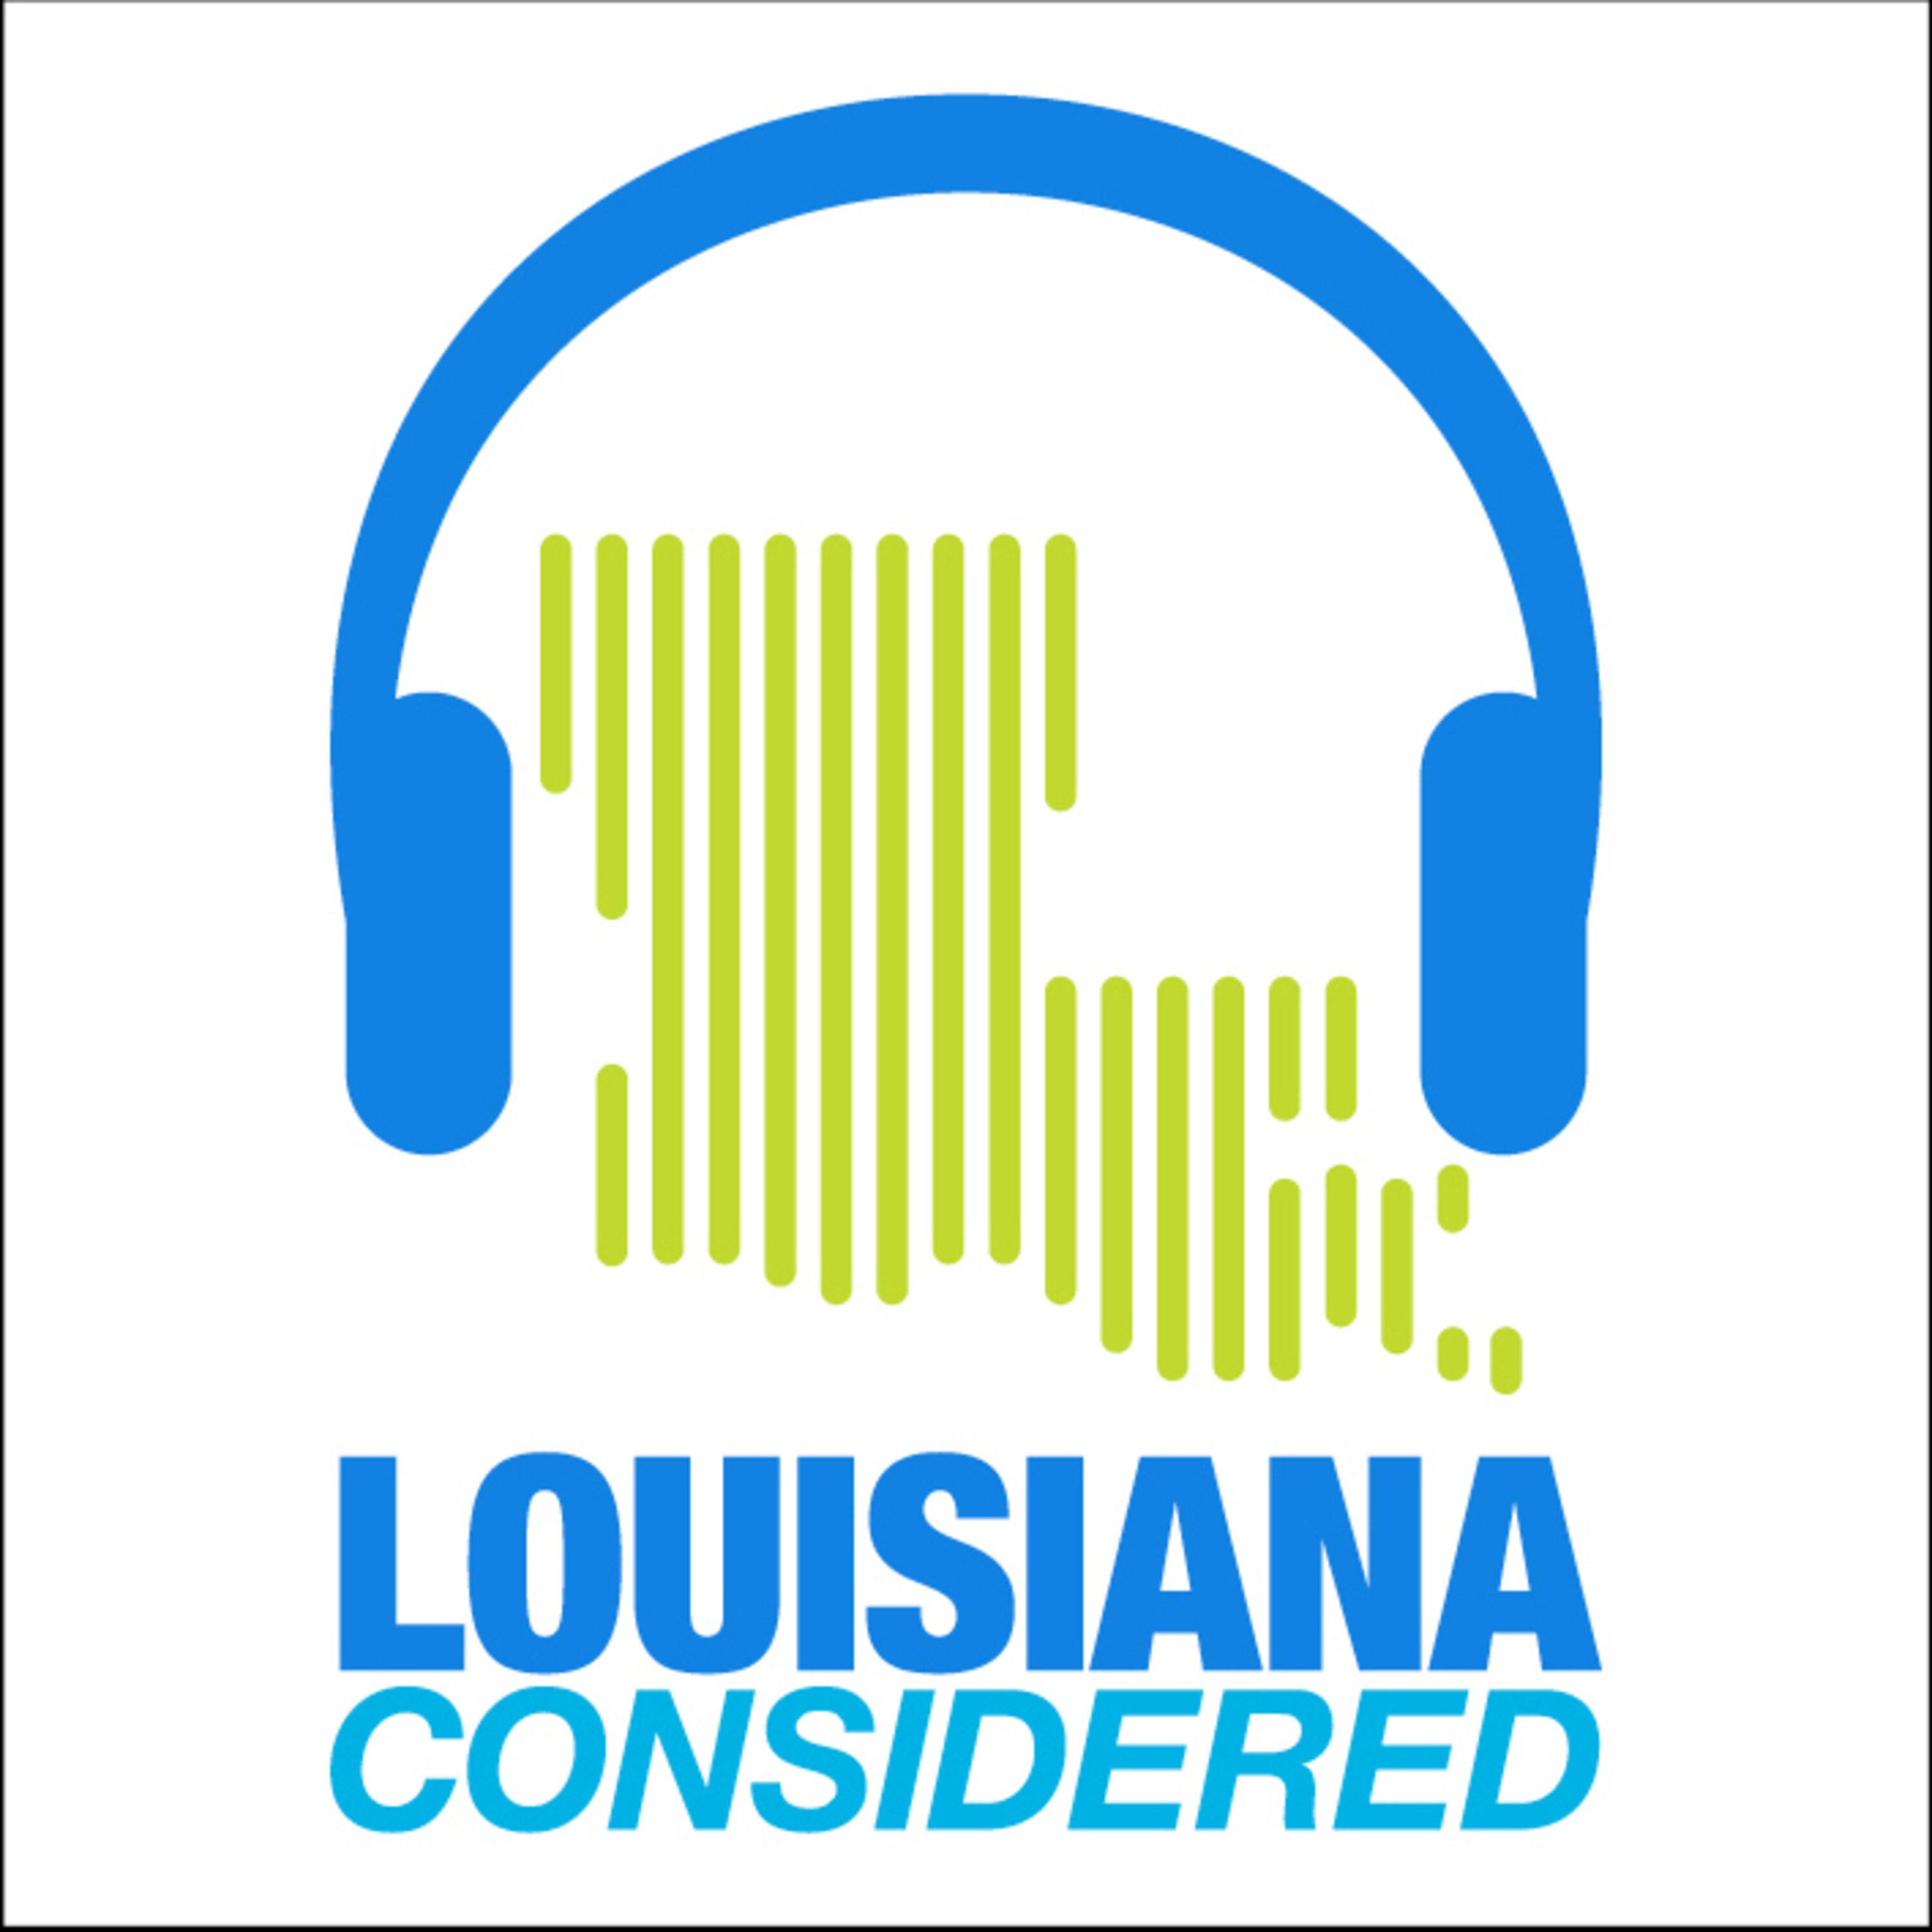 Thumbnail for "Louisiana Considered: Bicycle Safety In South Louisiana".